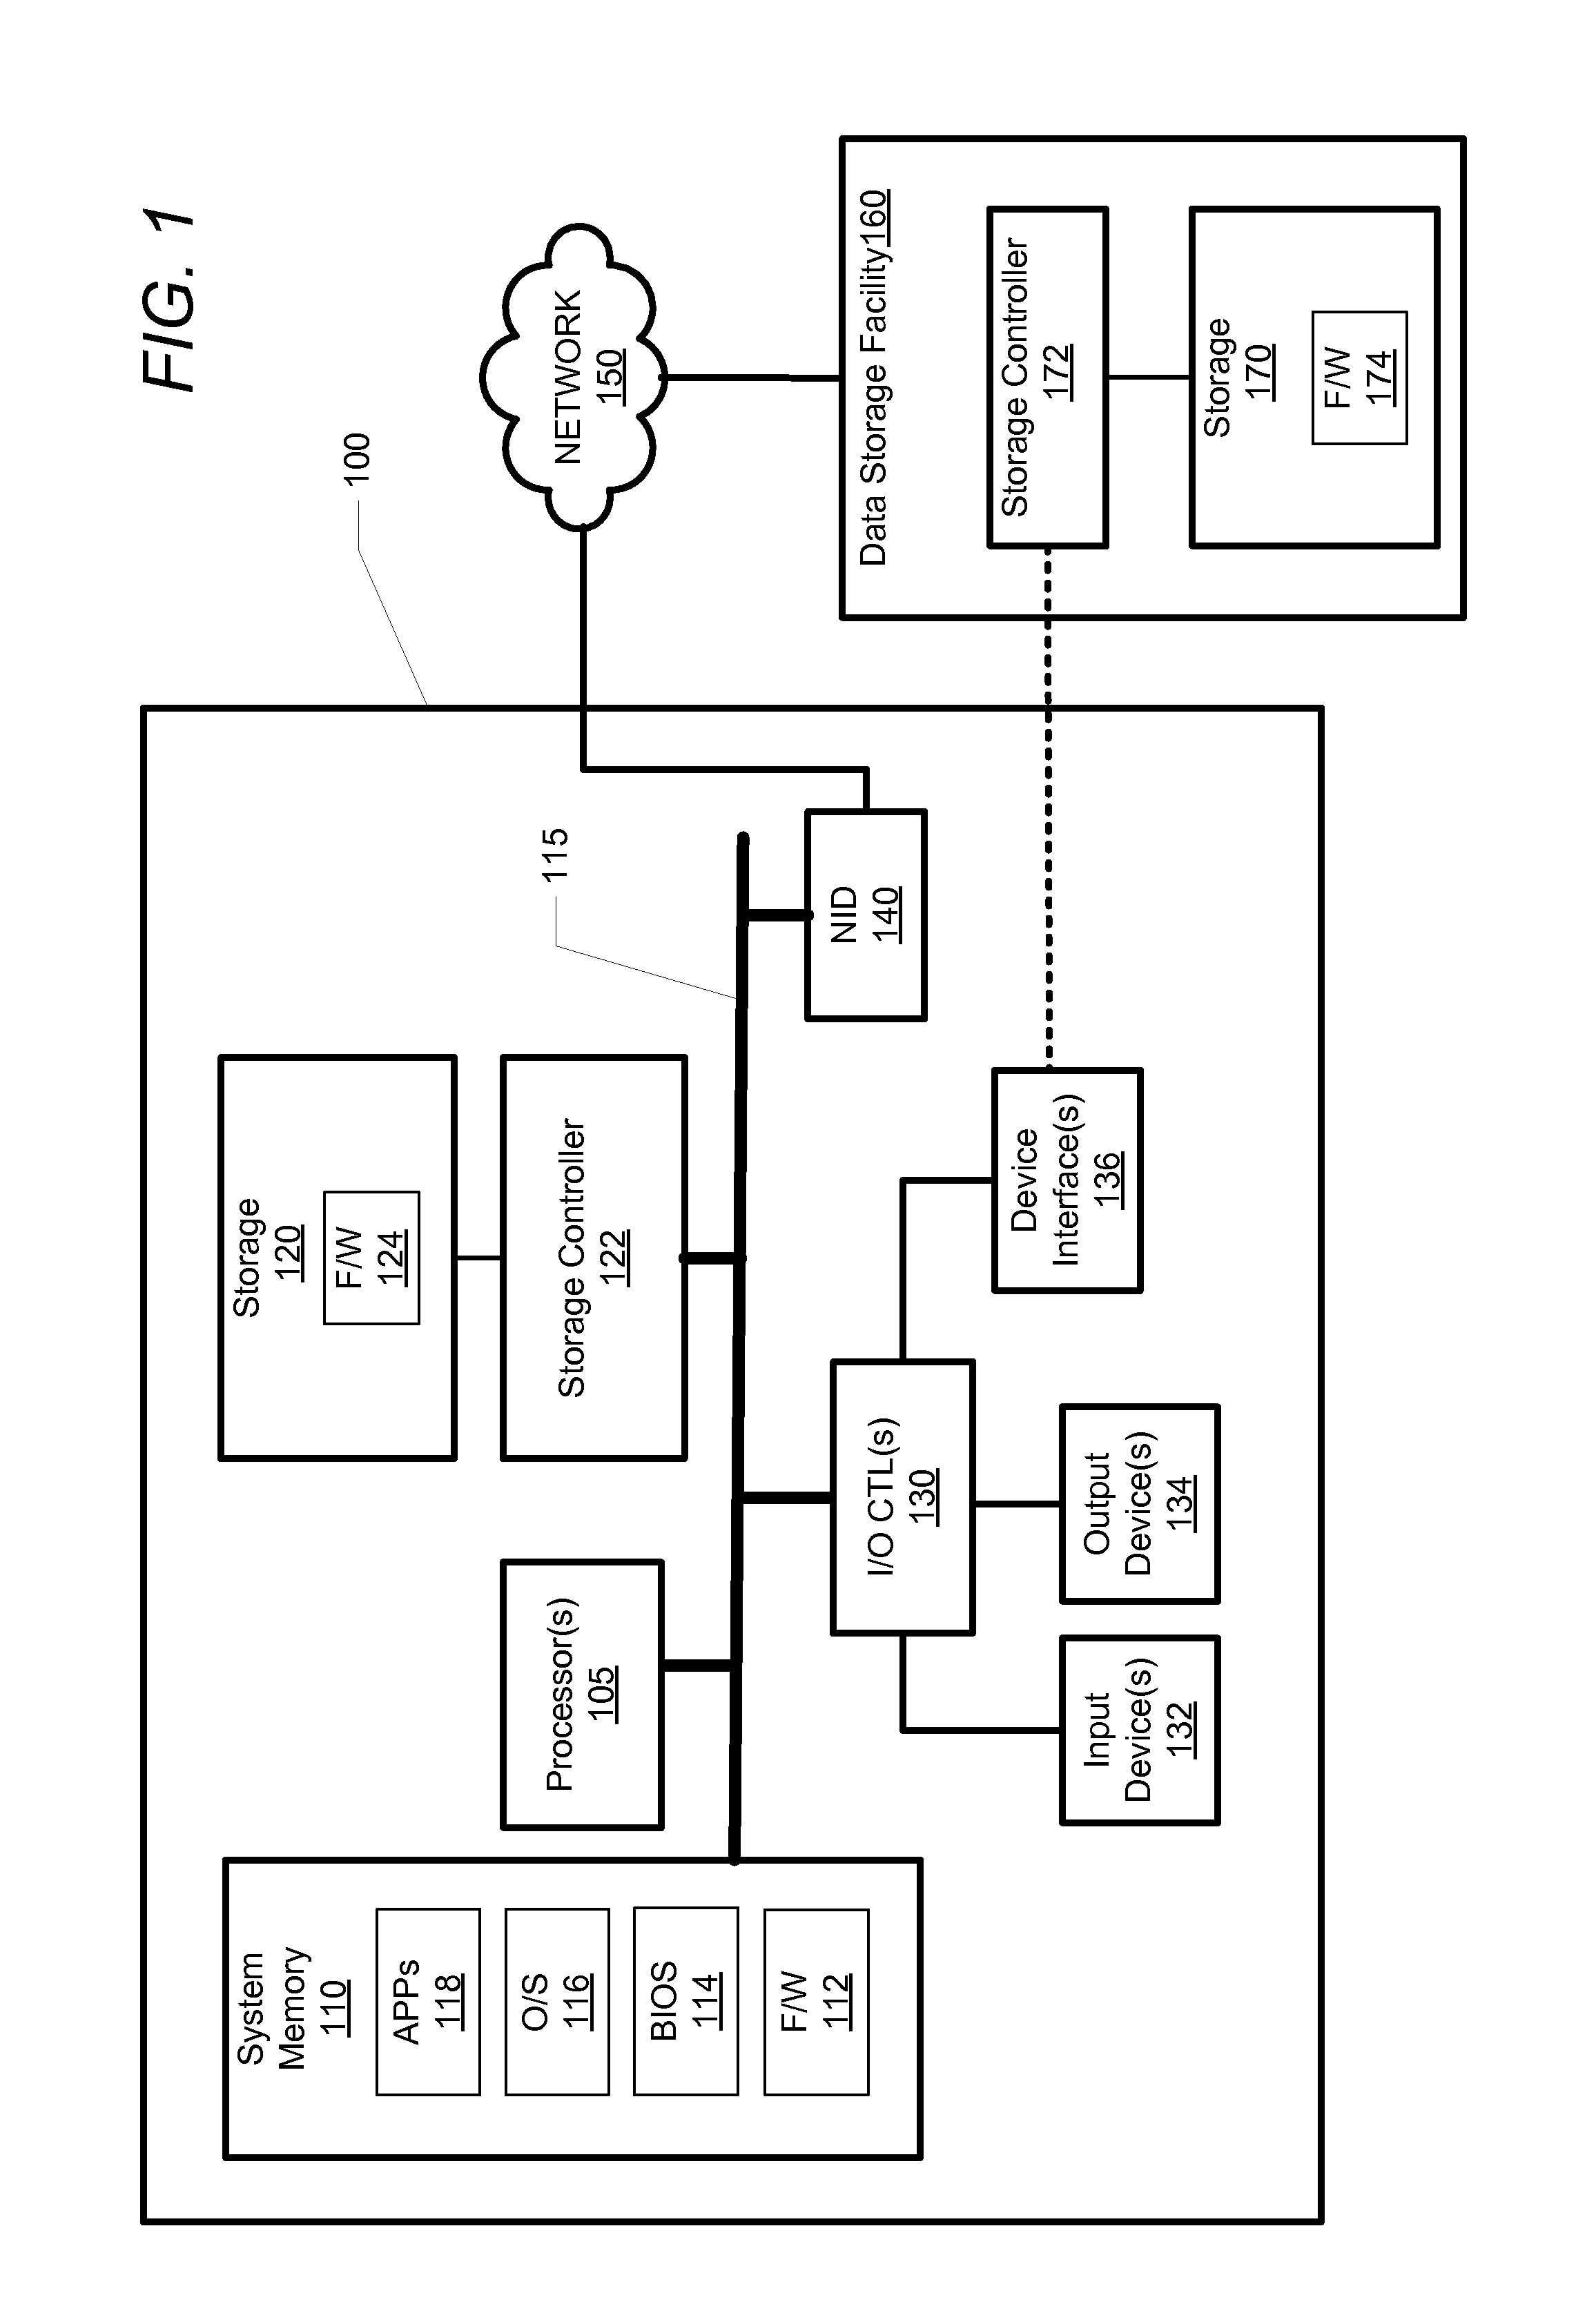 System and method for managing raid storage system having a hot spare drive